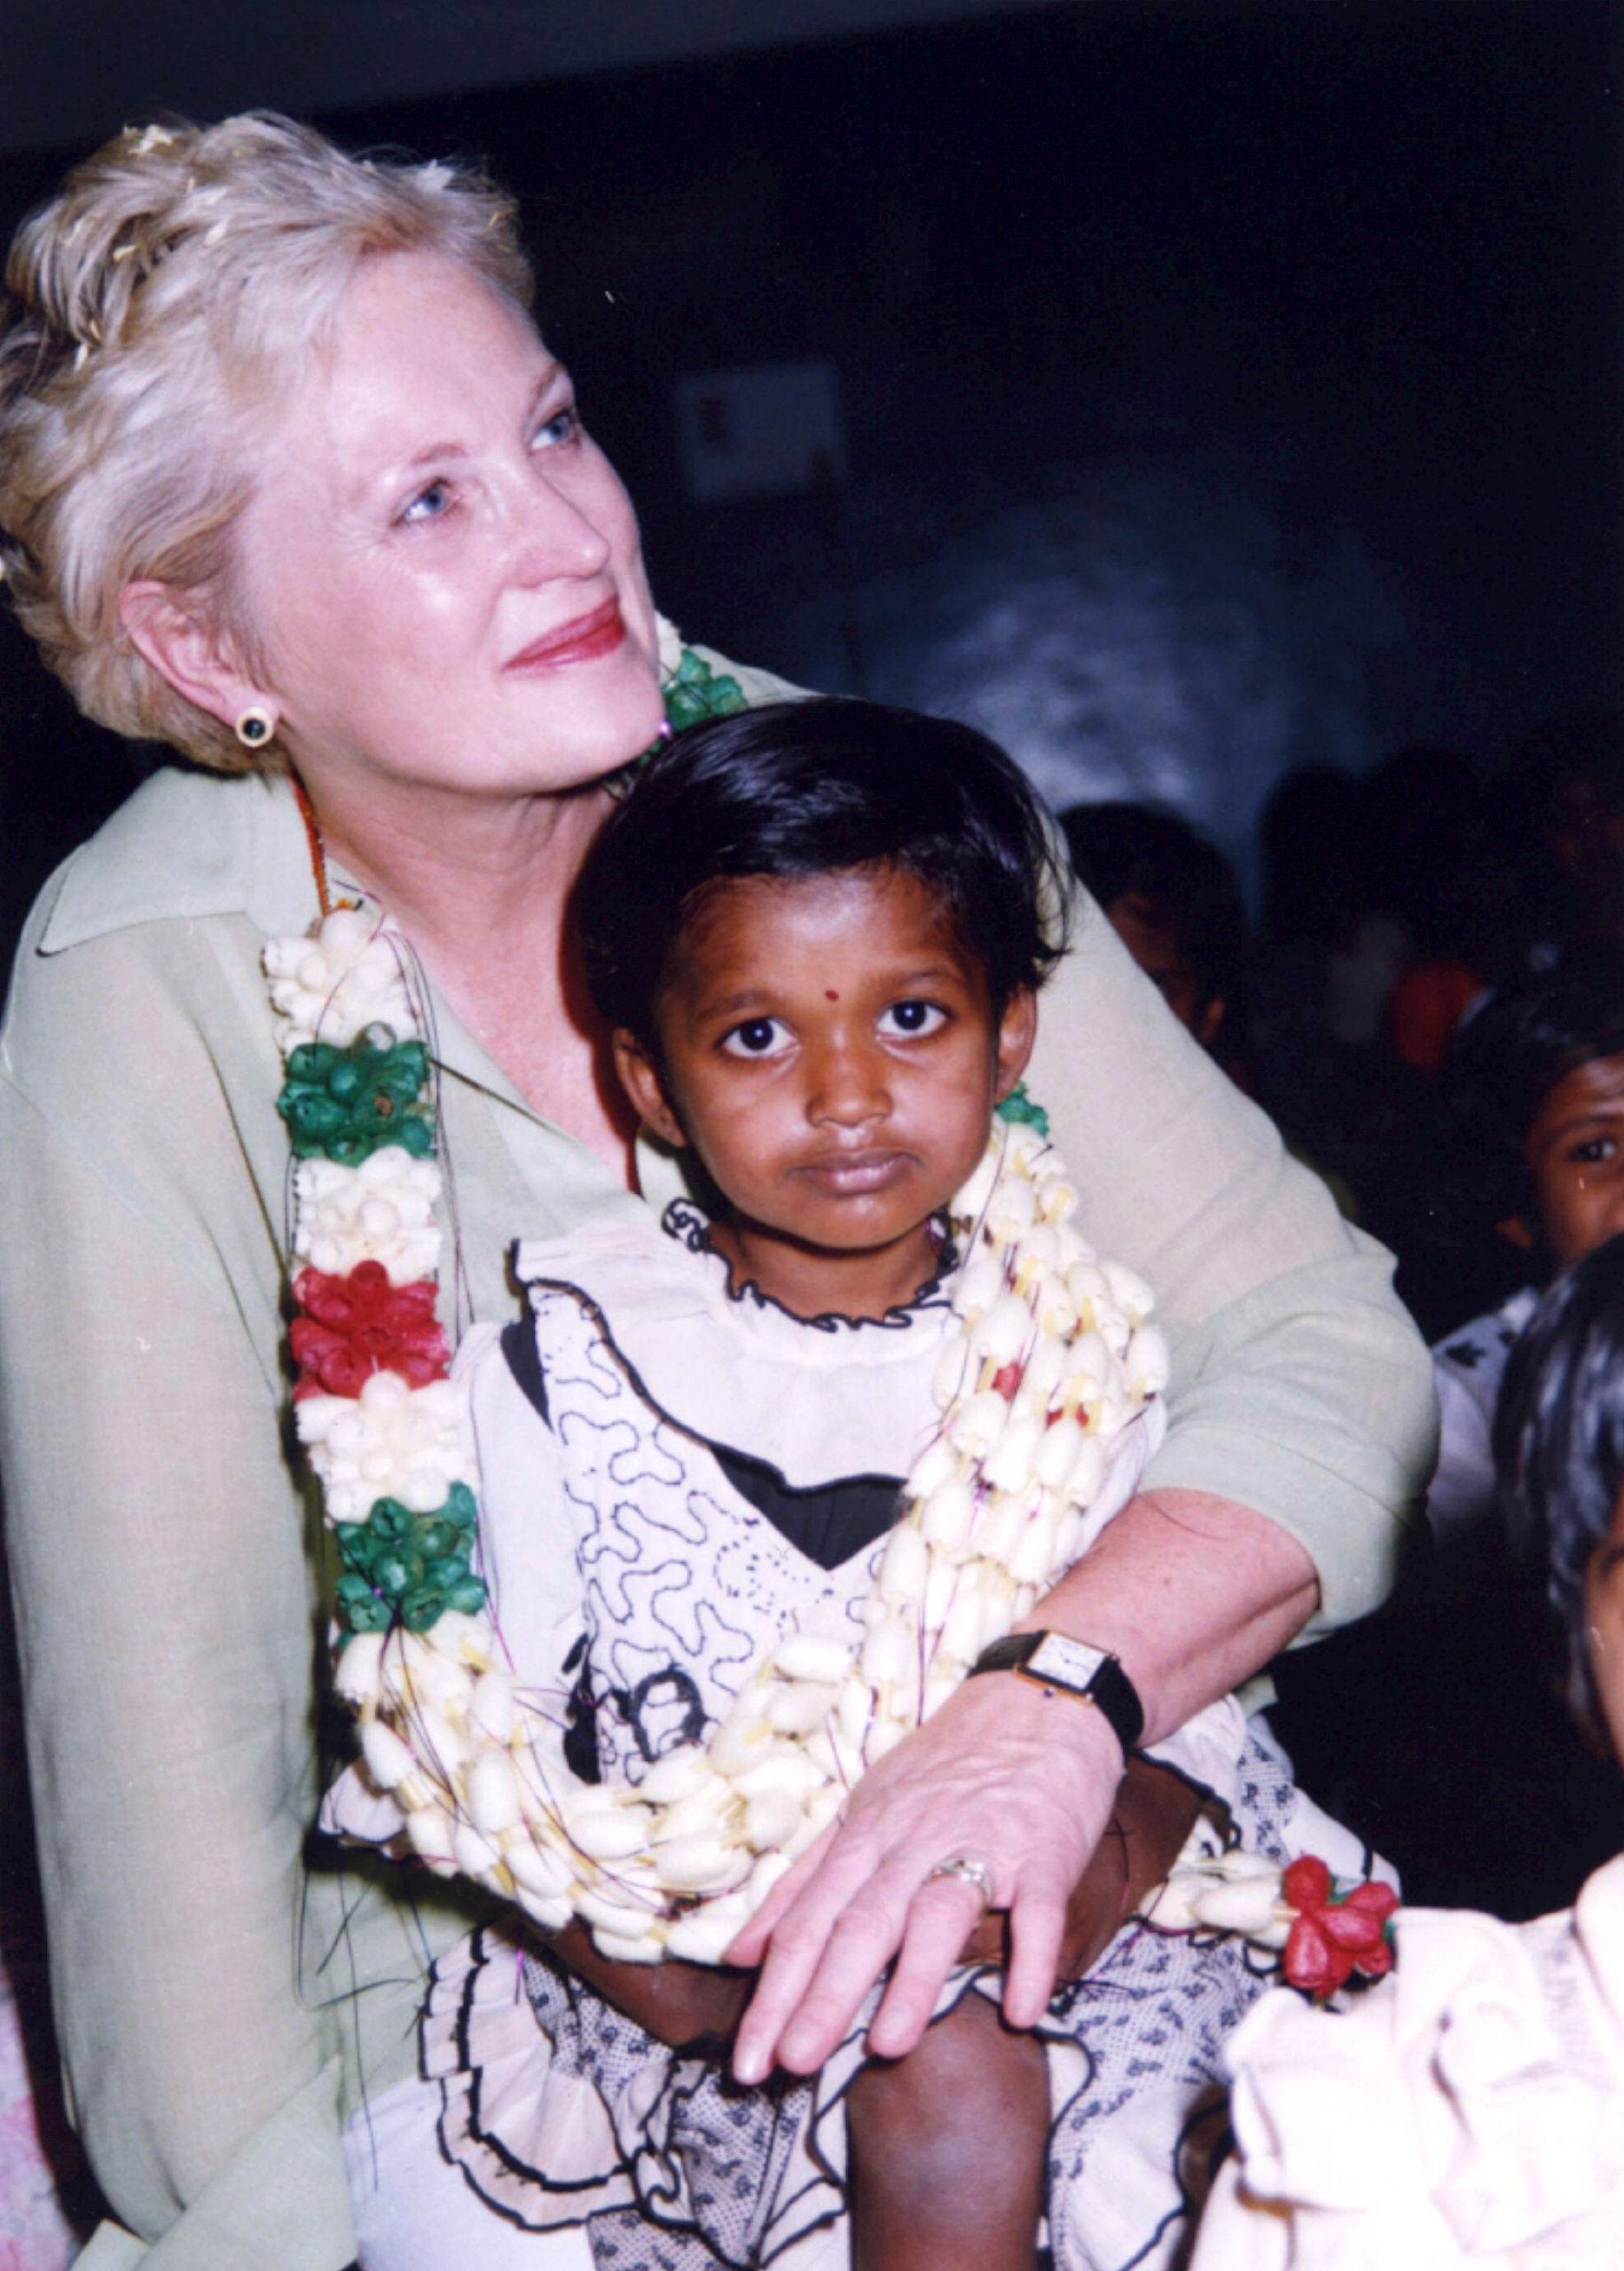 A woman is seated and holding a young child.